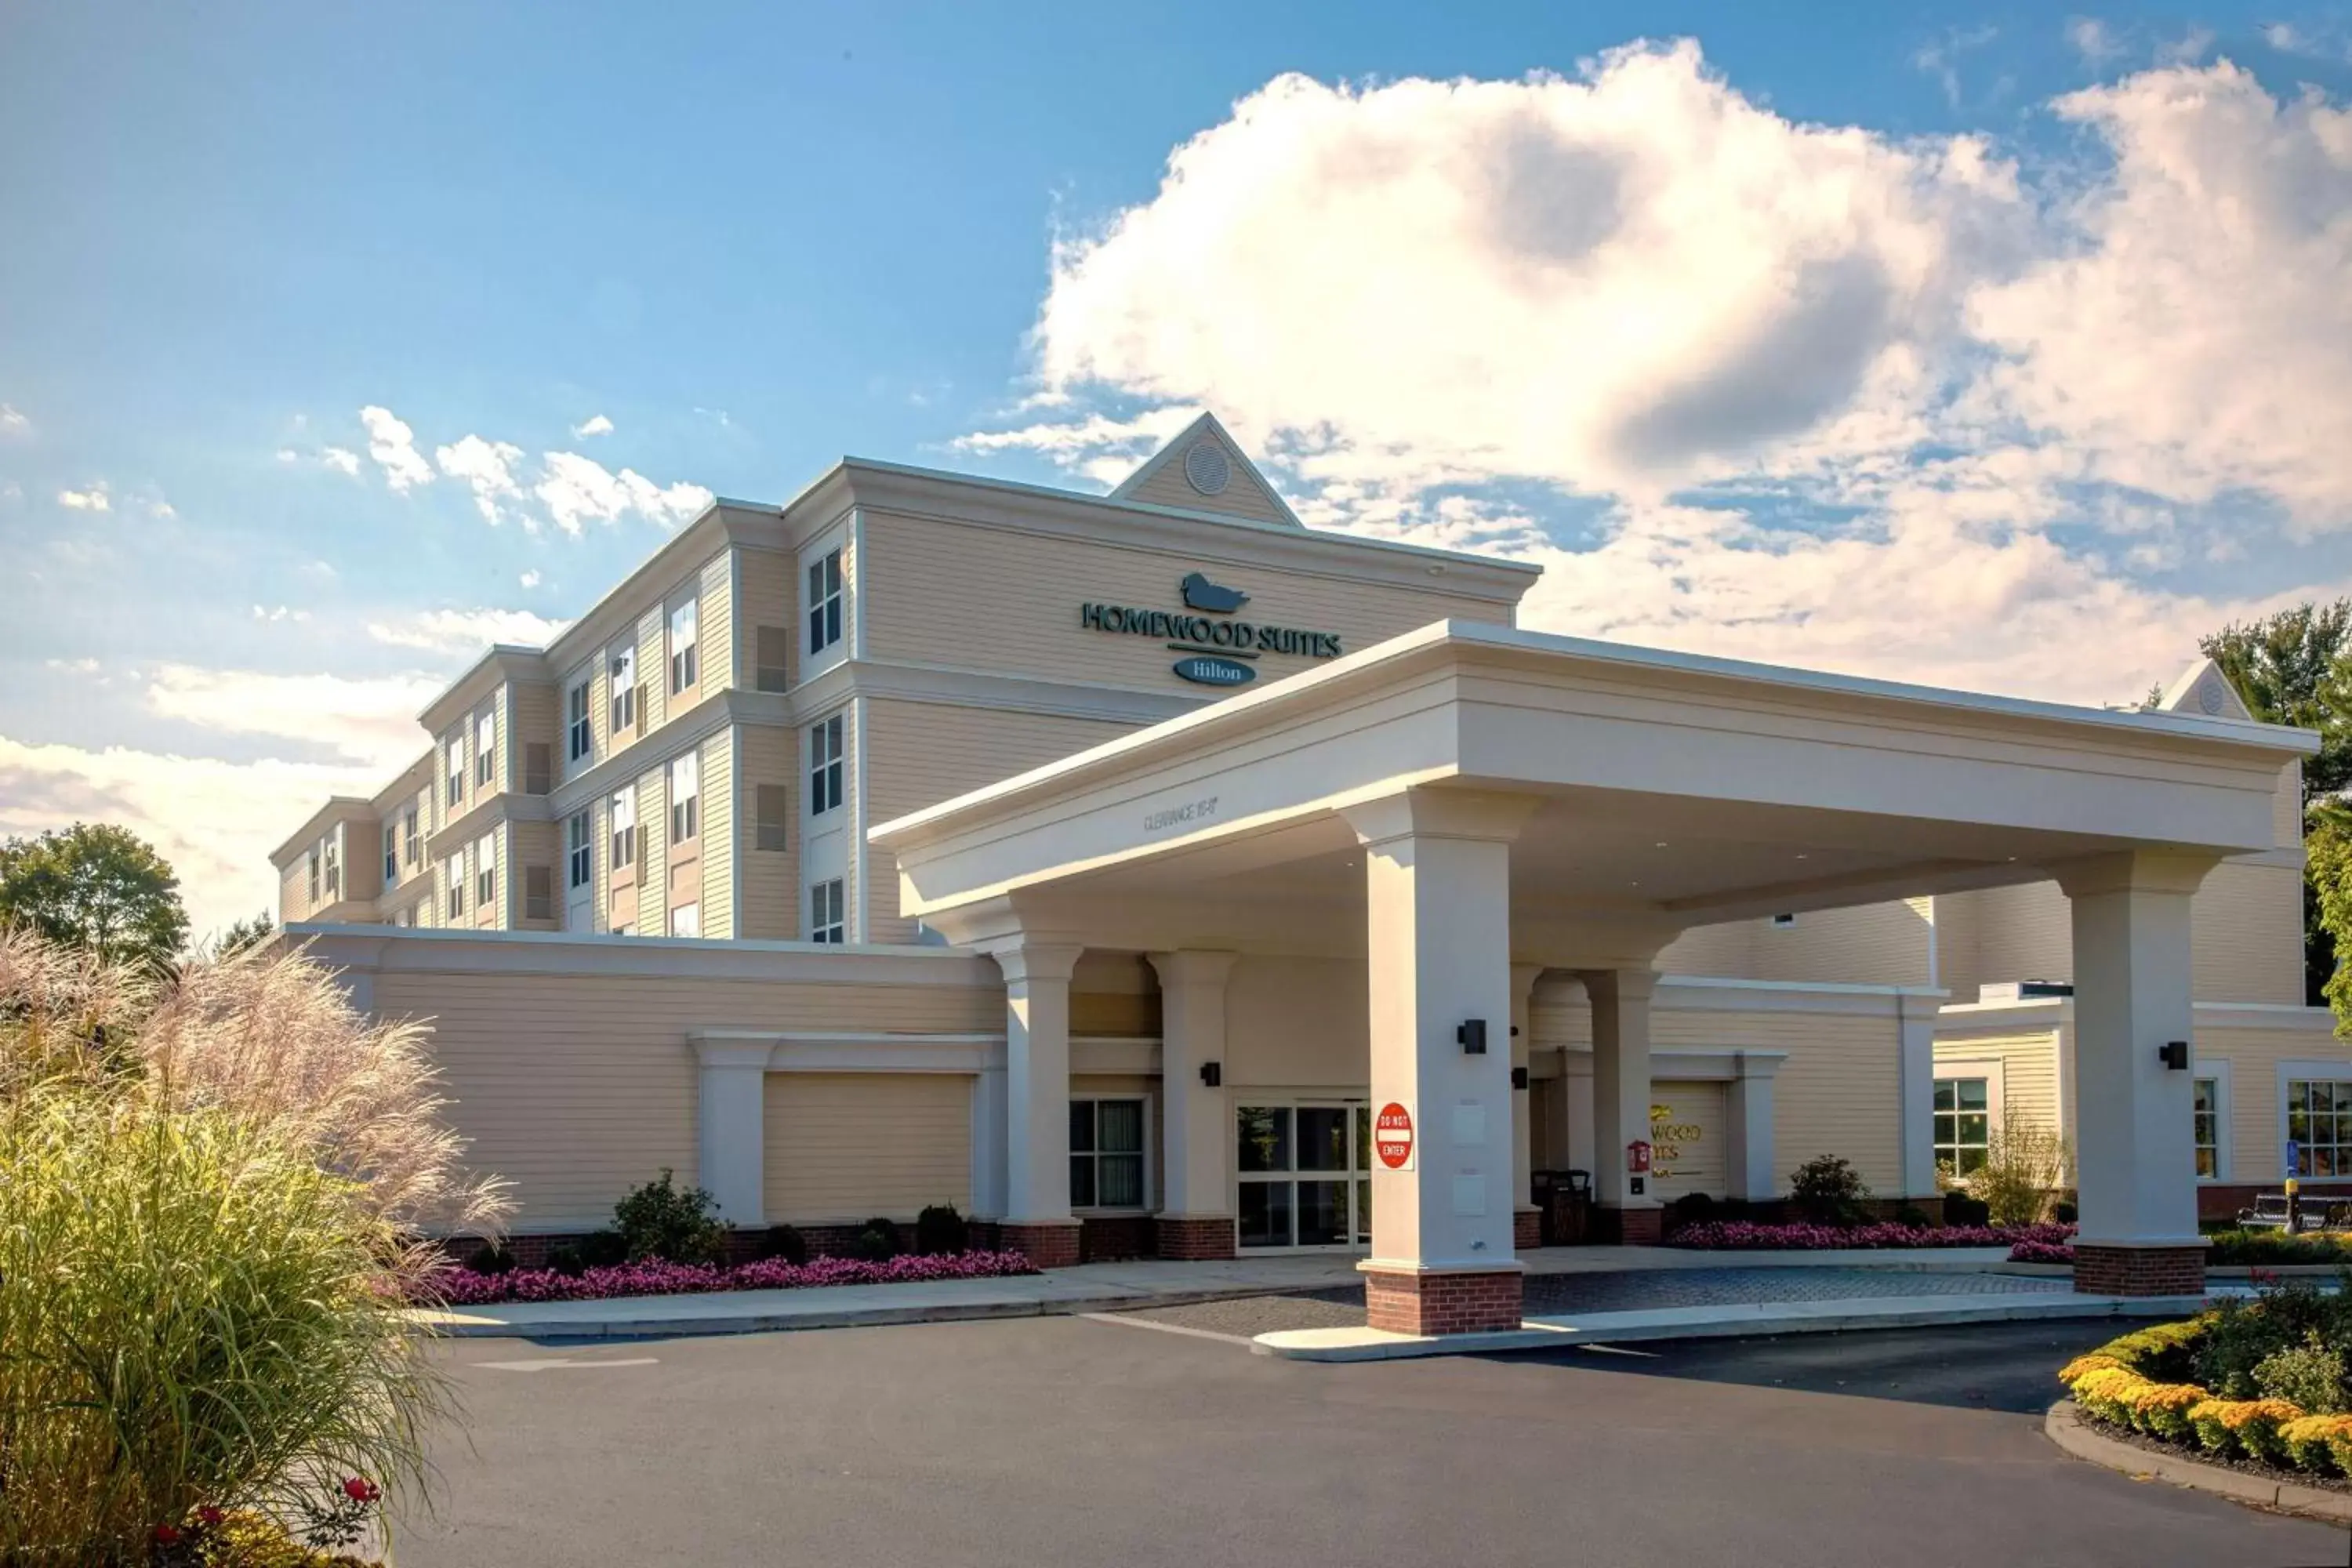 Property Building in Homewood Suites by Hilton Boston/Canton, MA